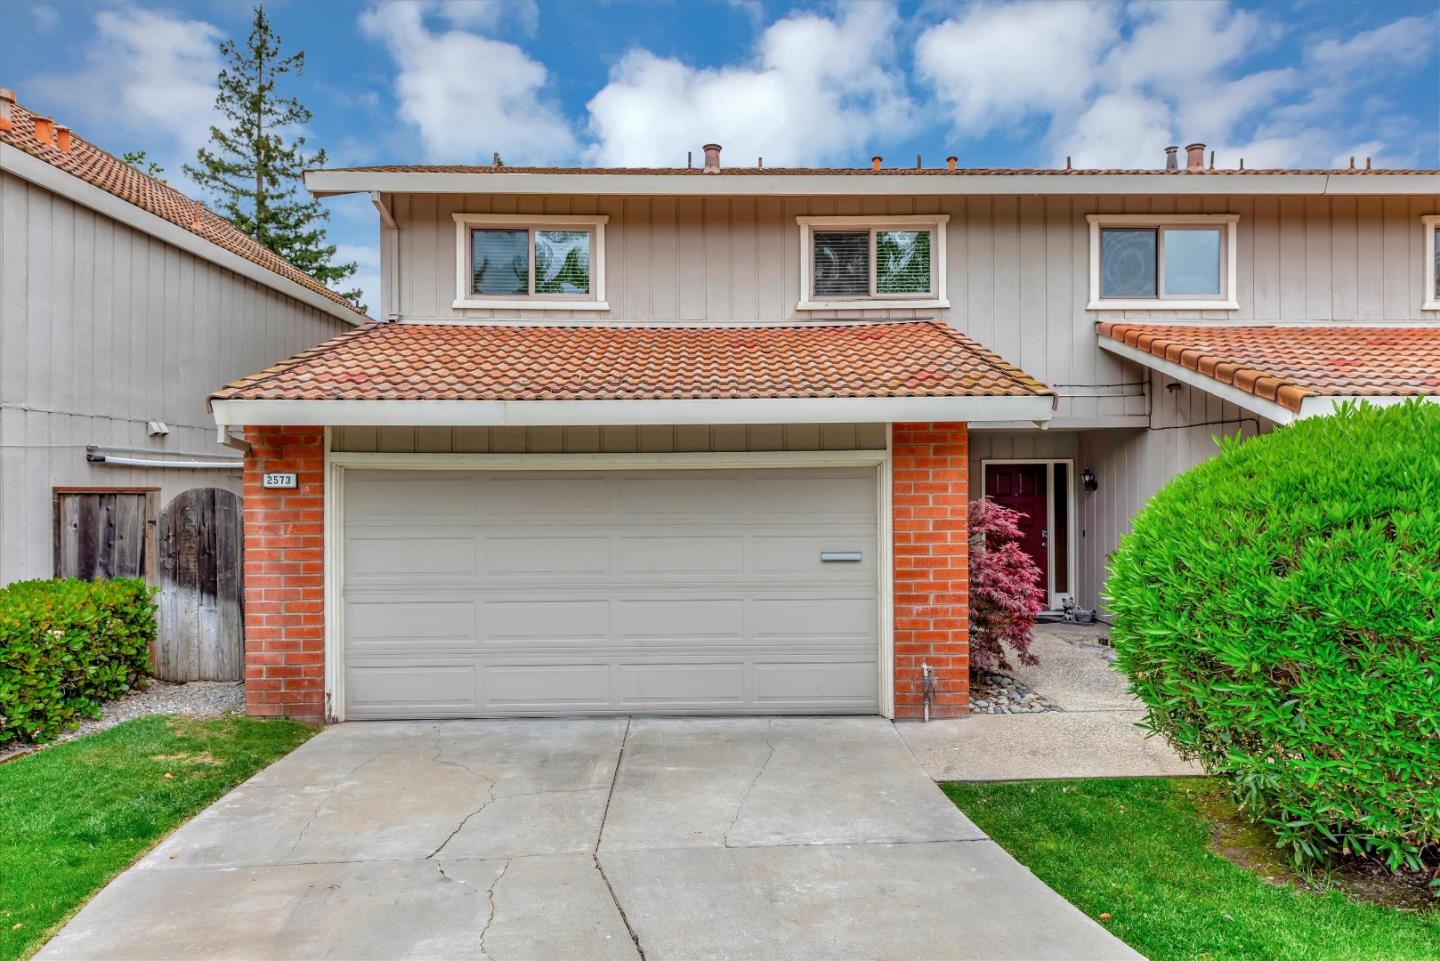 Photo of 2573 Tolworth Dr in San Jose, CA